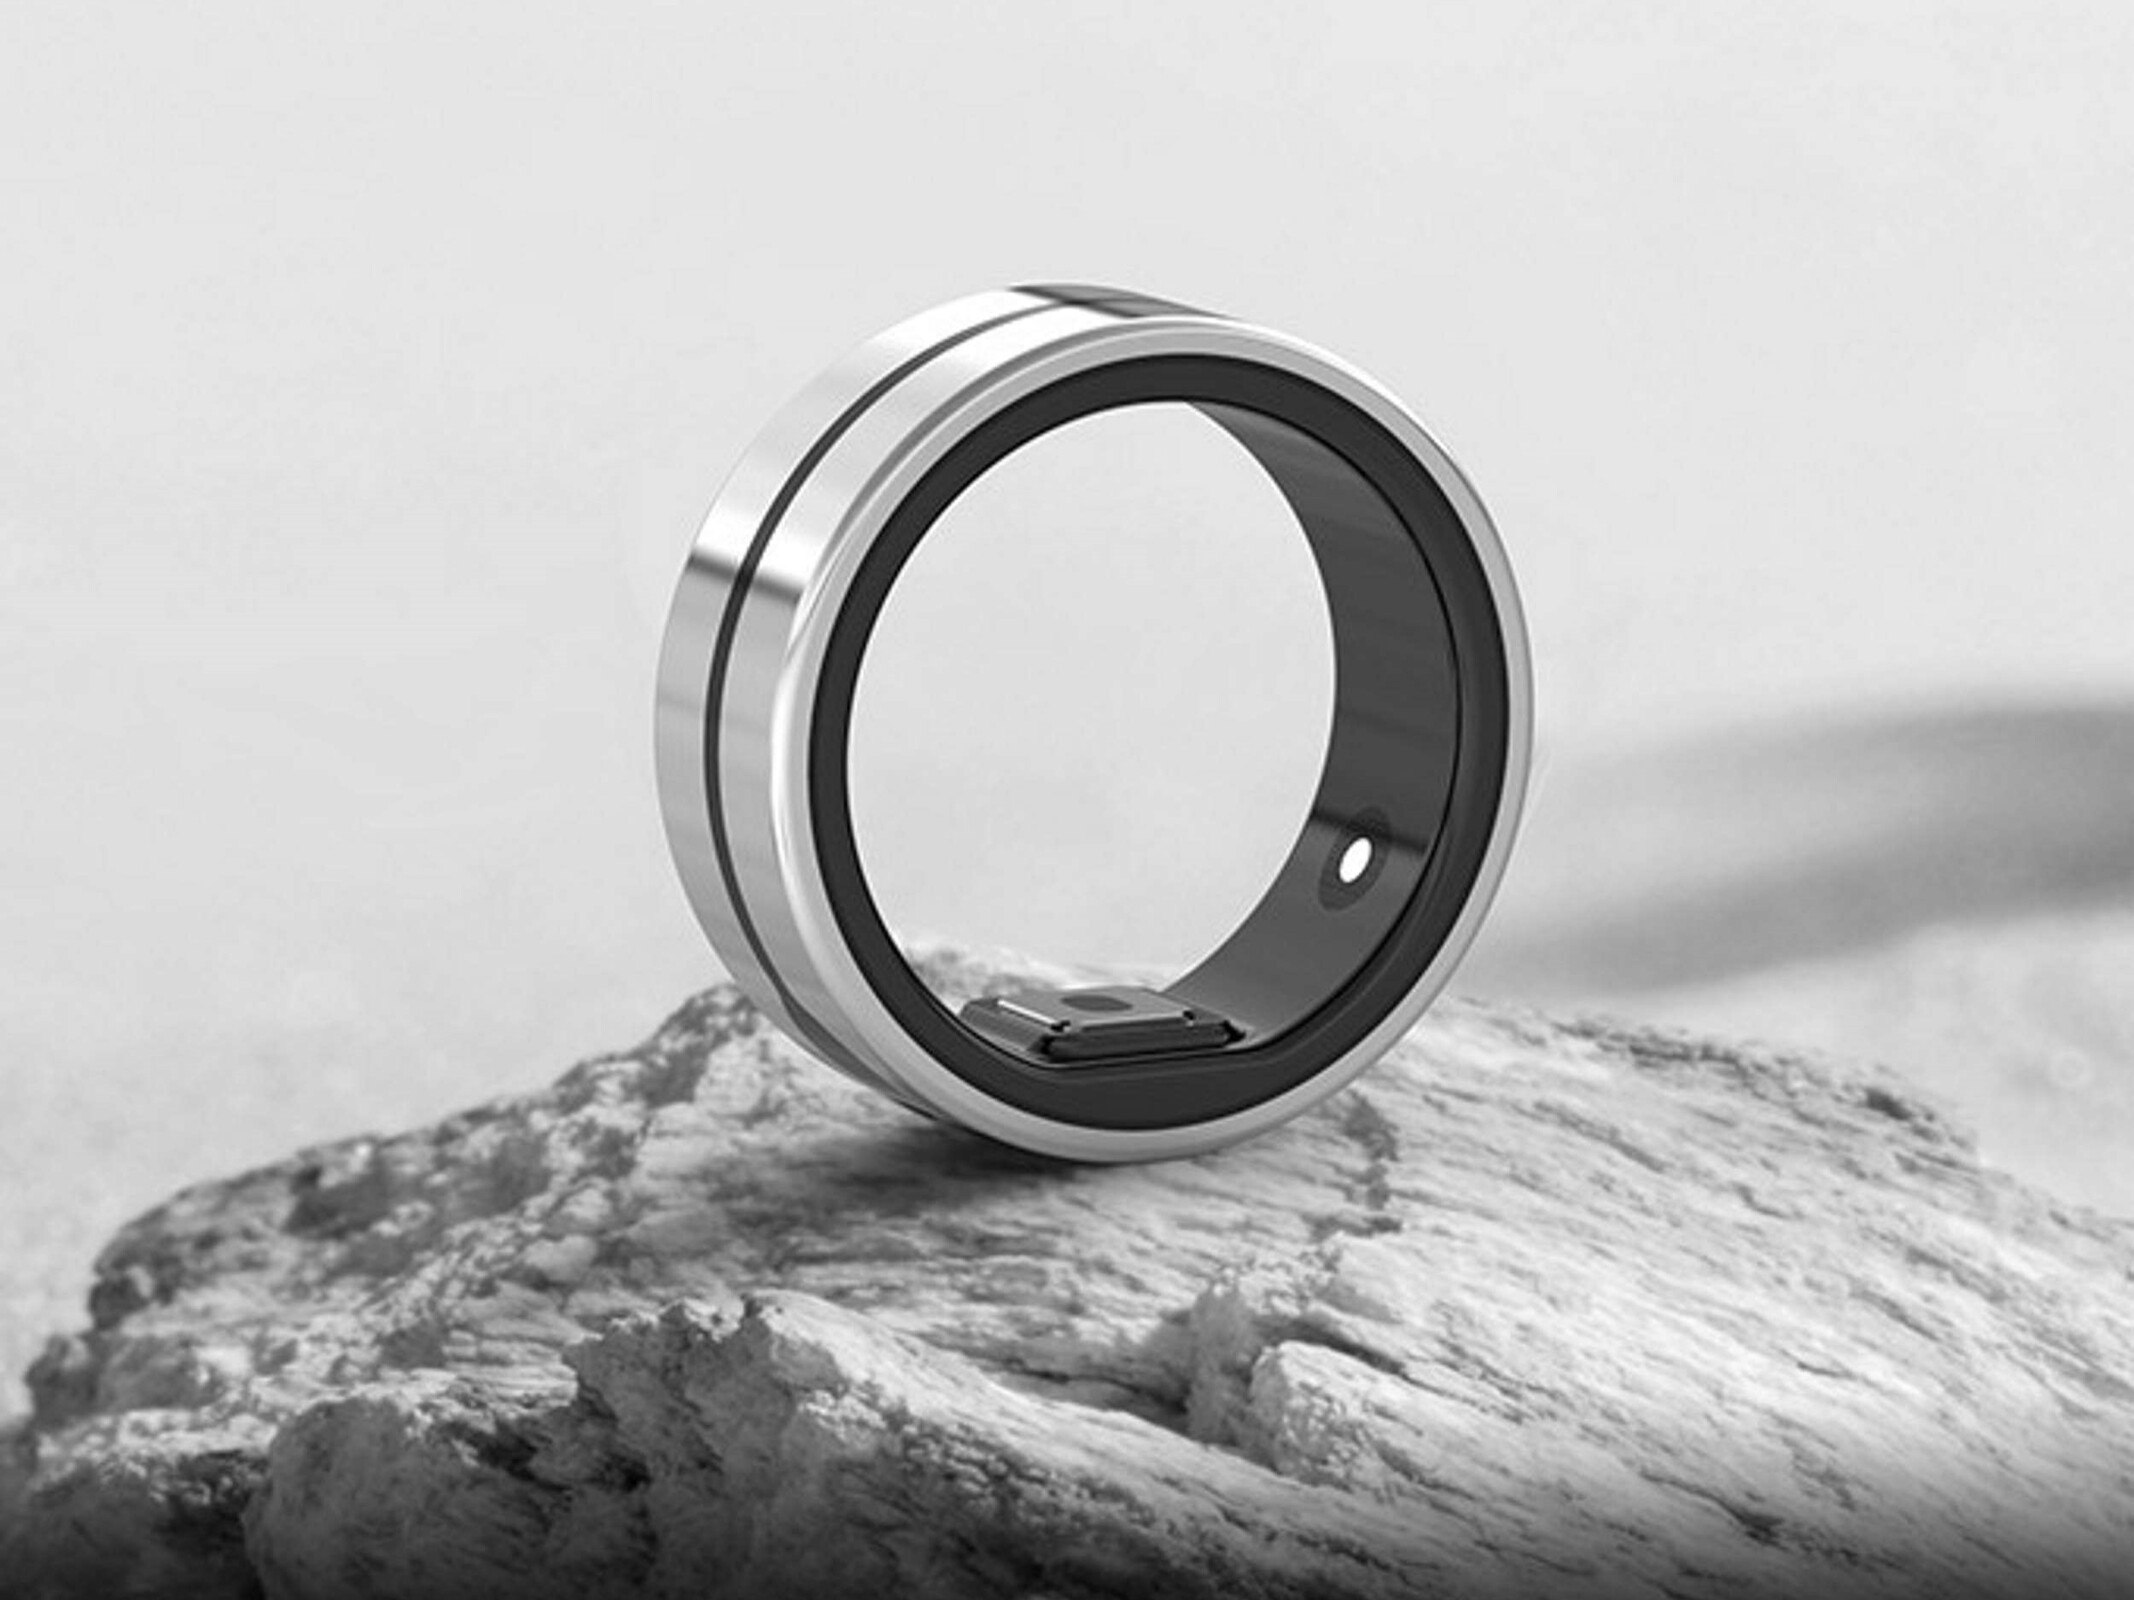 The Ringo smart ring has been unveiled: it can take ECGs, measure temperature, track body fat and water